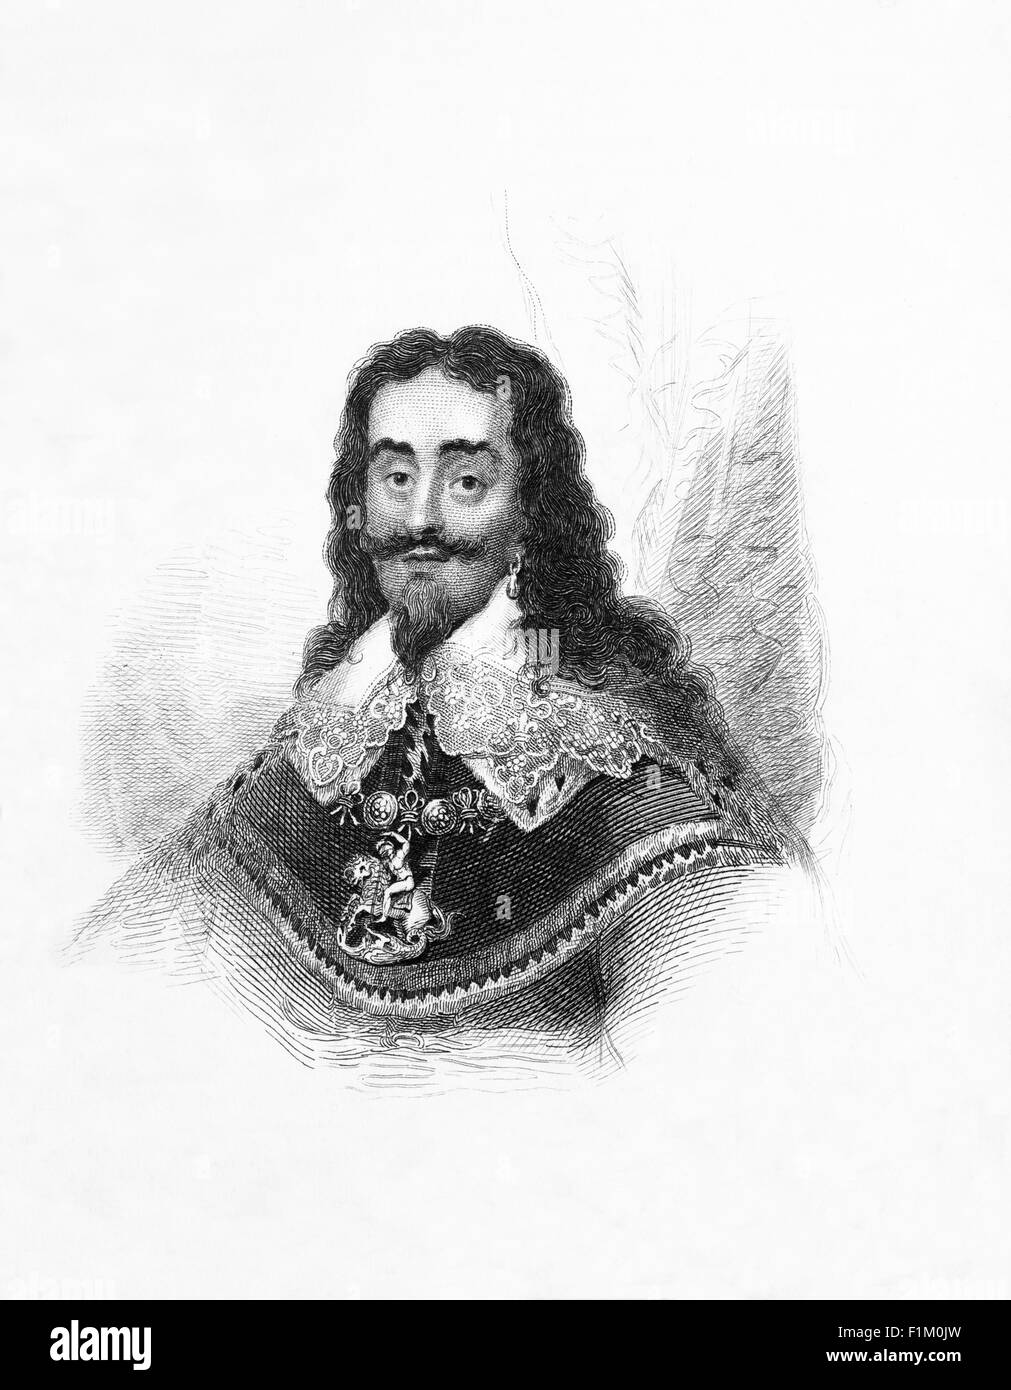 Charles I (1600 – 1649), King of England, King of Scotland, and King of Ireland from 27 March 1625 until his execution in 1649 as a result of the English CIvil War. Stock Photo